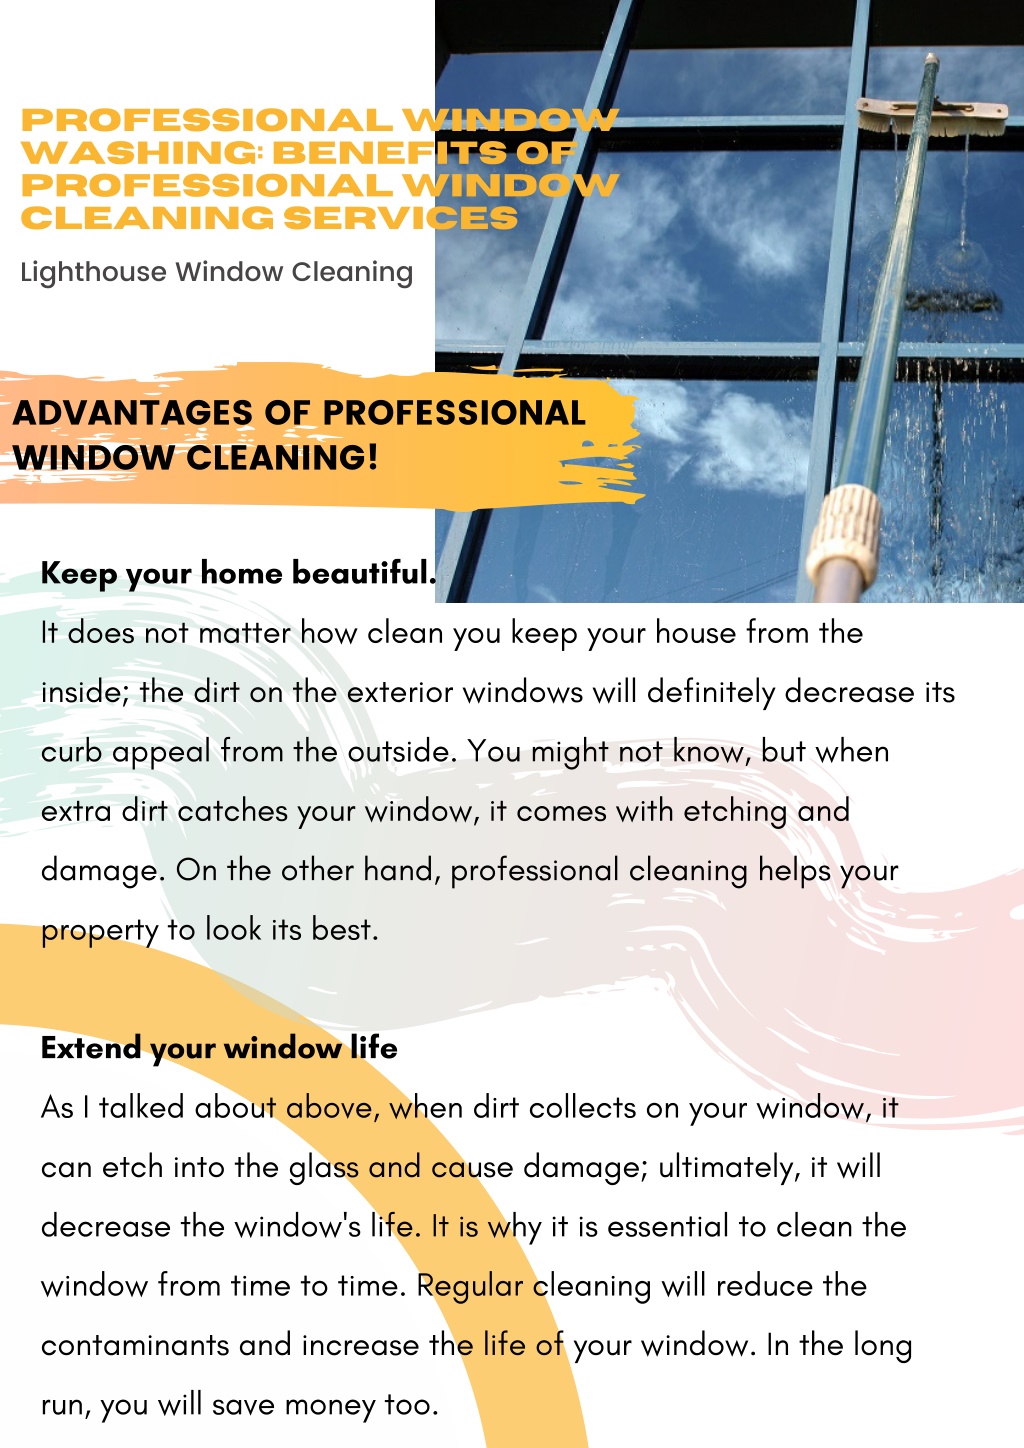 Benefits of Commercial Window Cleaning - Window Cleaning